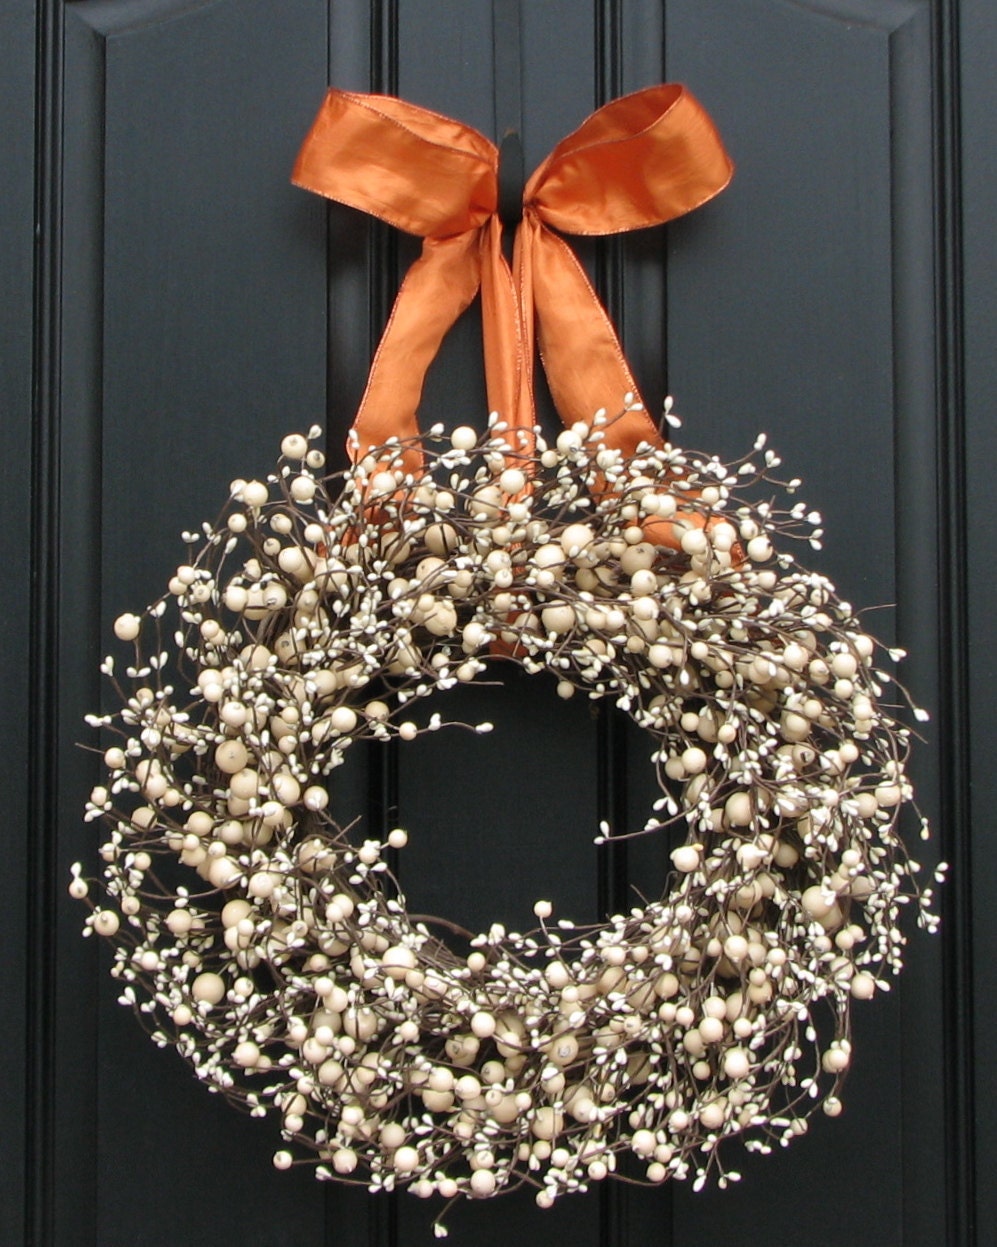 Fall Wreath for Front Door Decor - Orange and Cream Berry Wreath for Fall